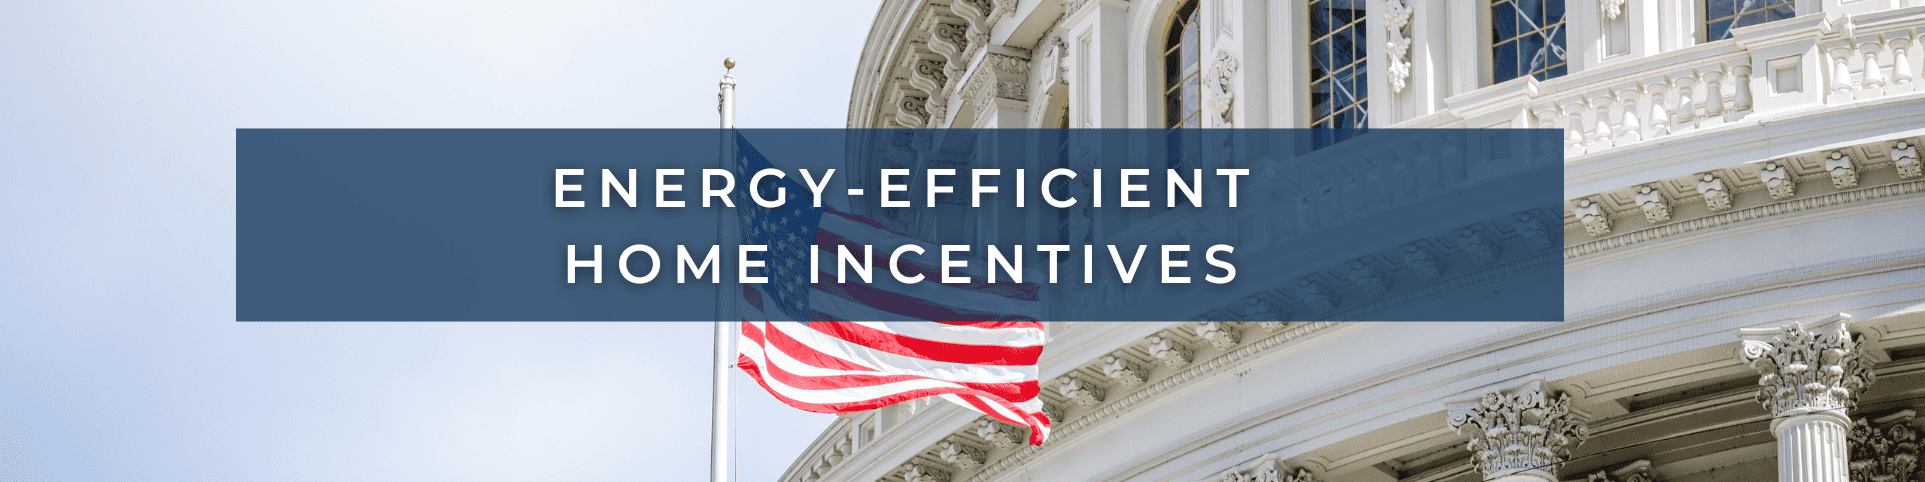 Energy-Efficient Home Incentives